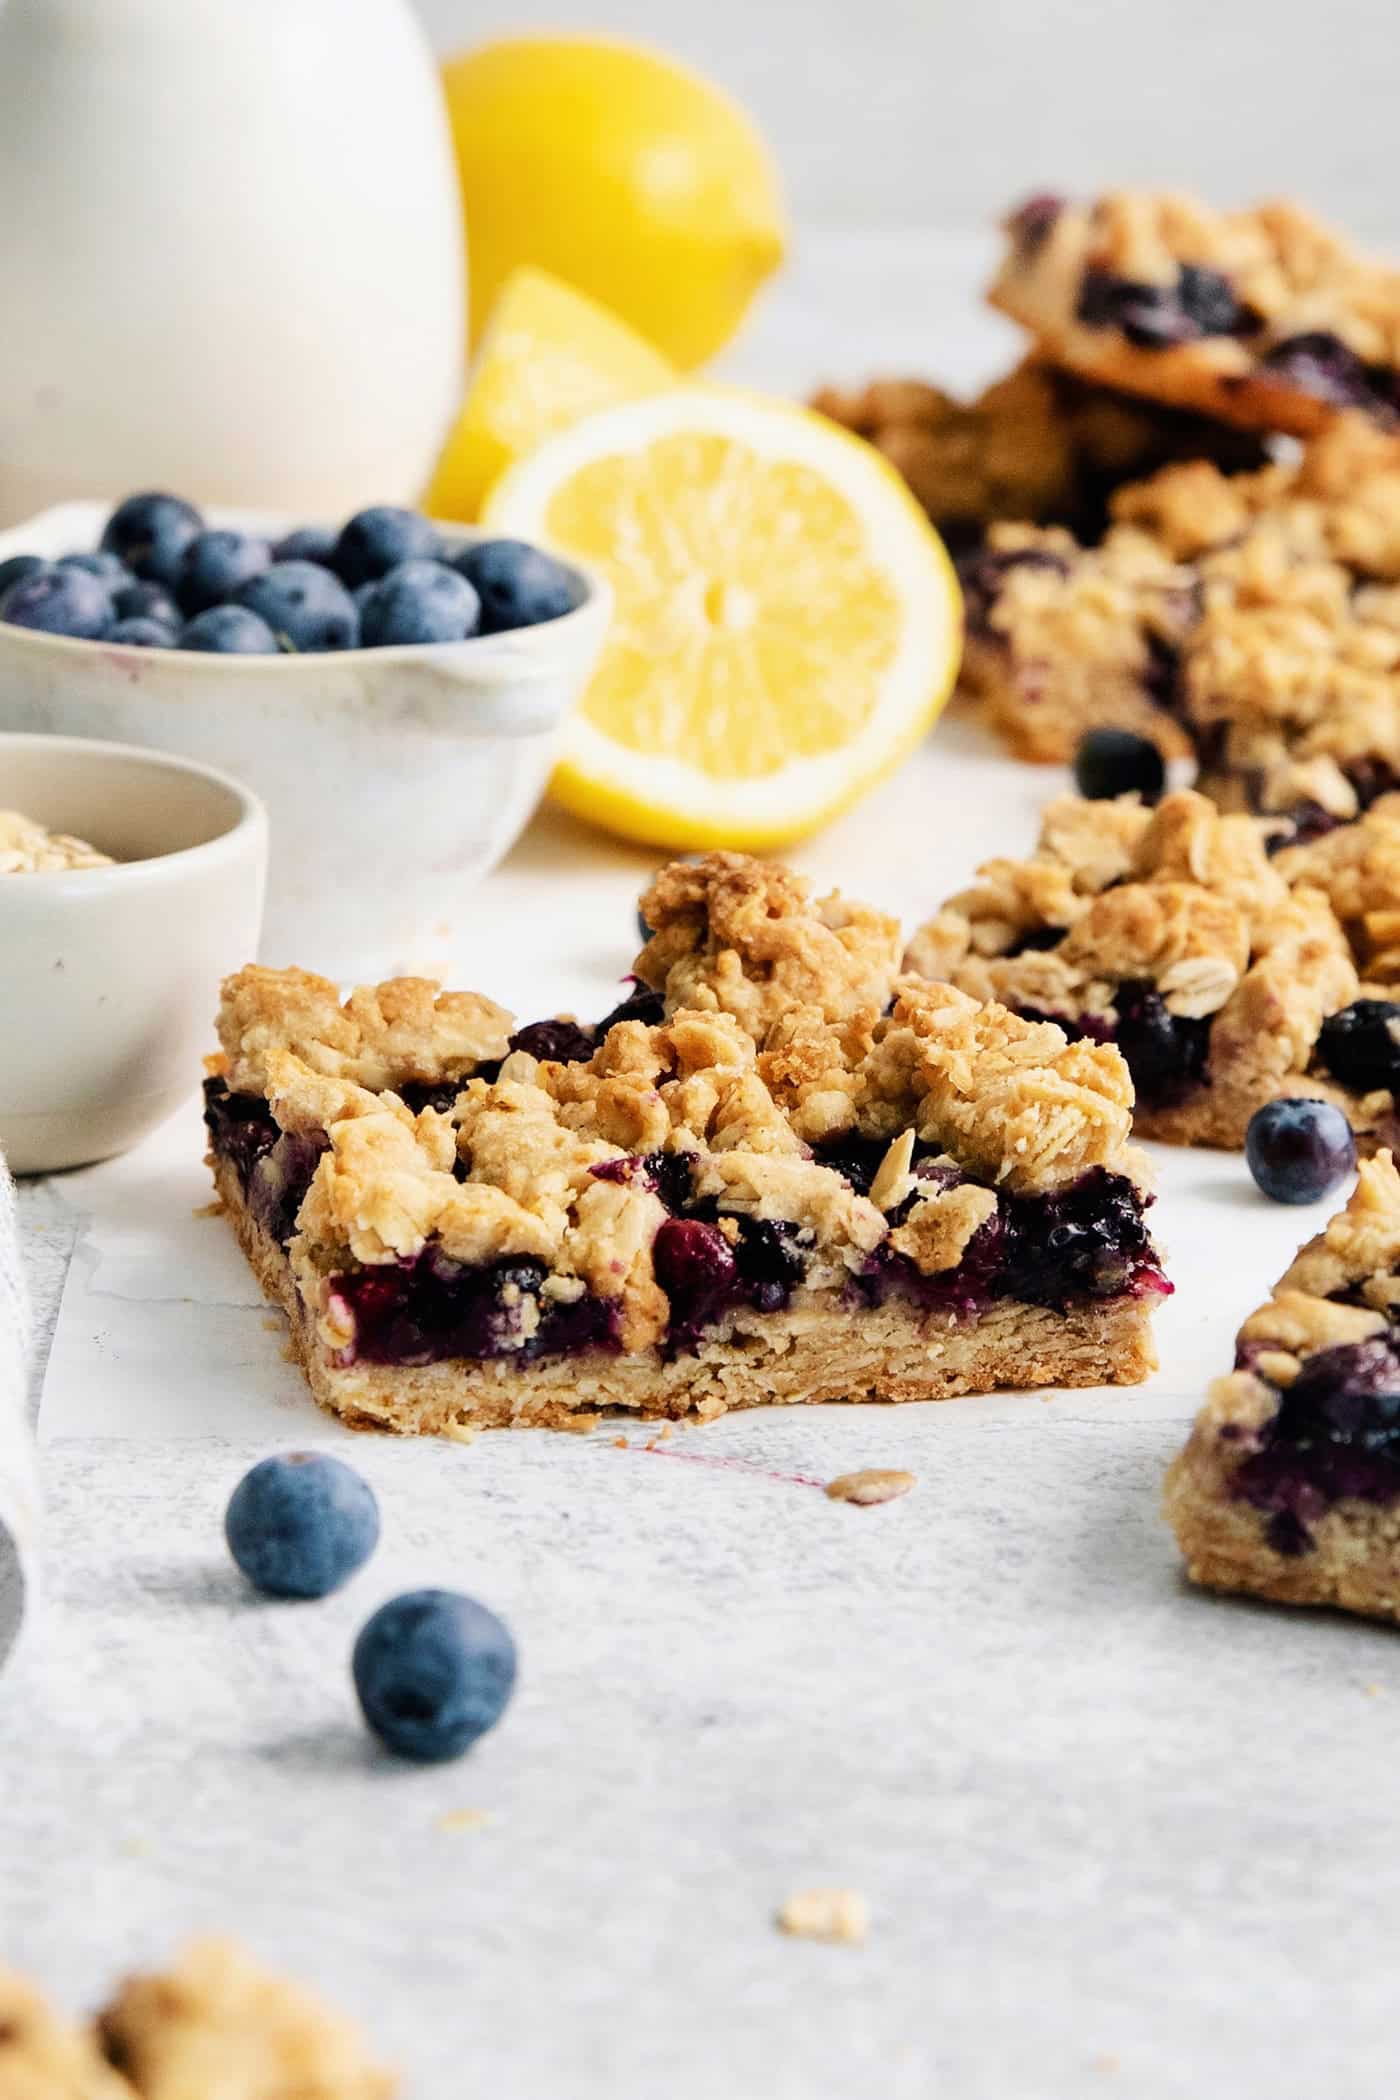 Blueberry crumble bars surrounded by fresh lemons and bowls of blueberries.